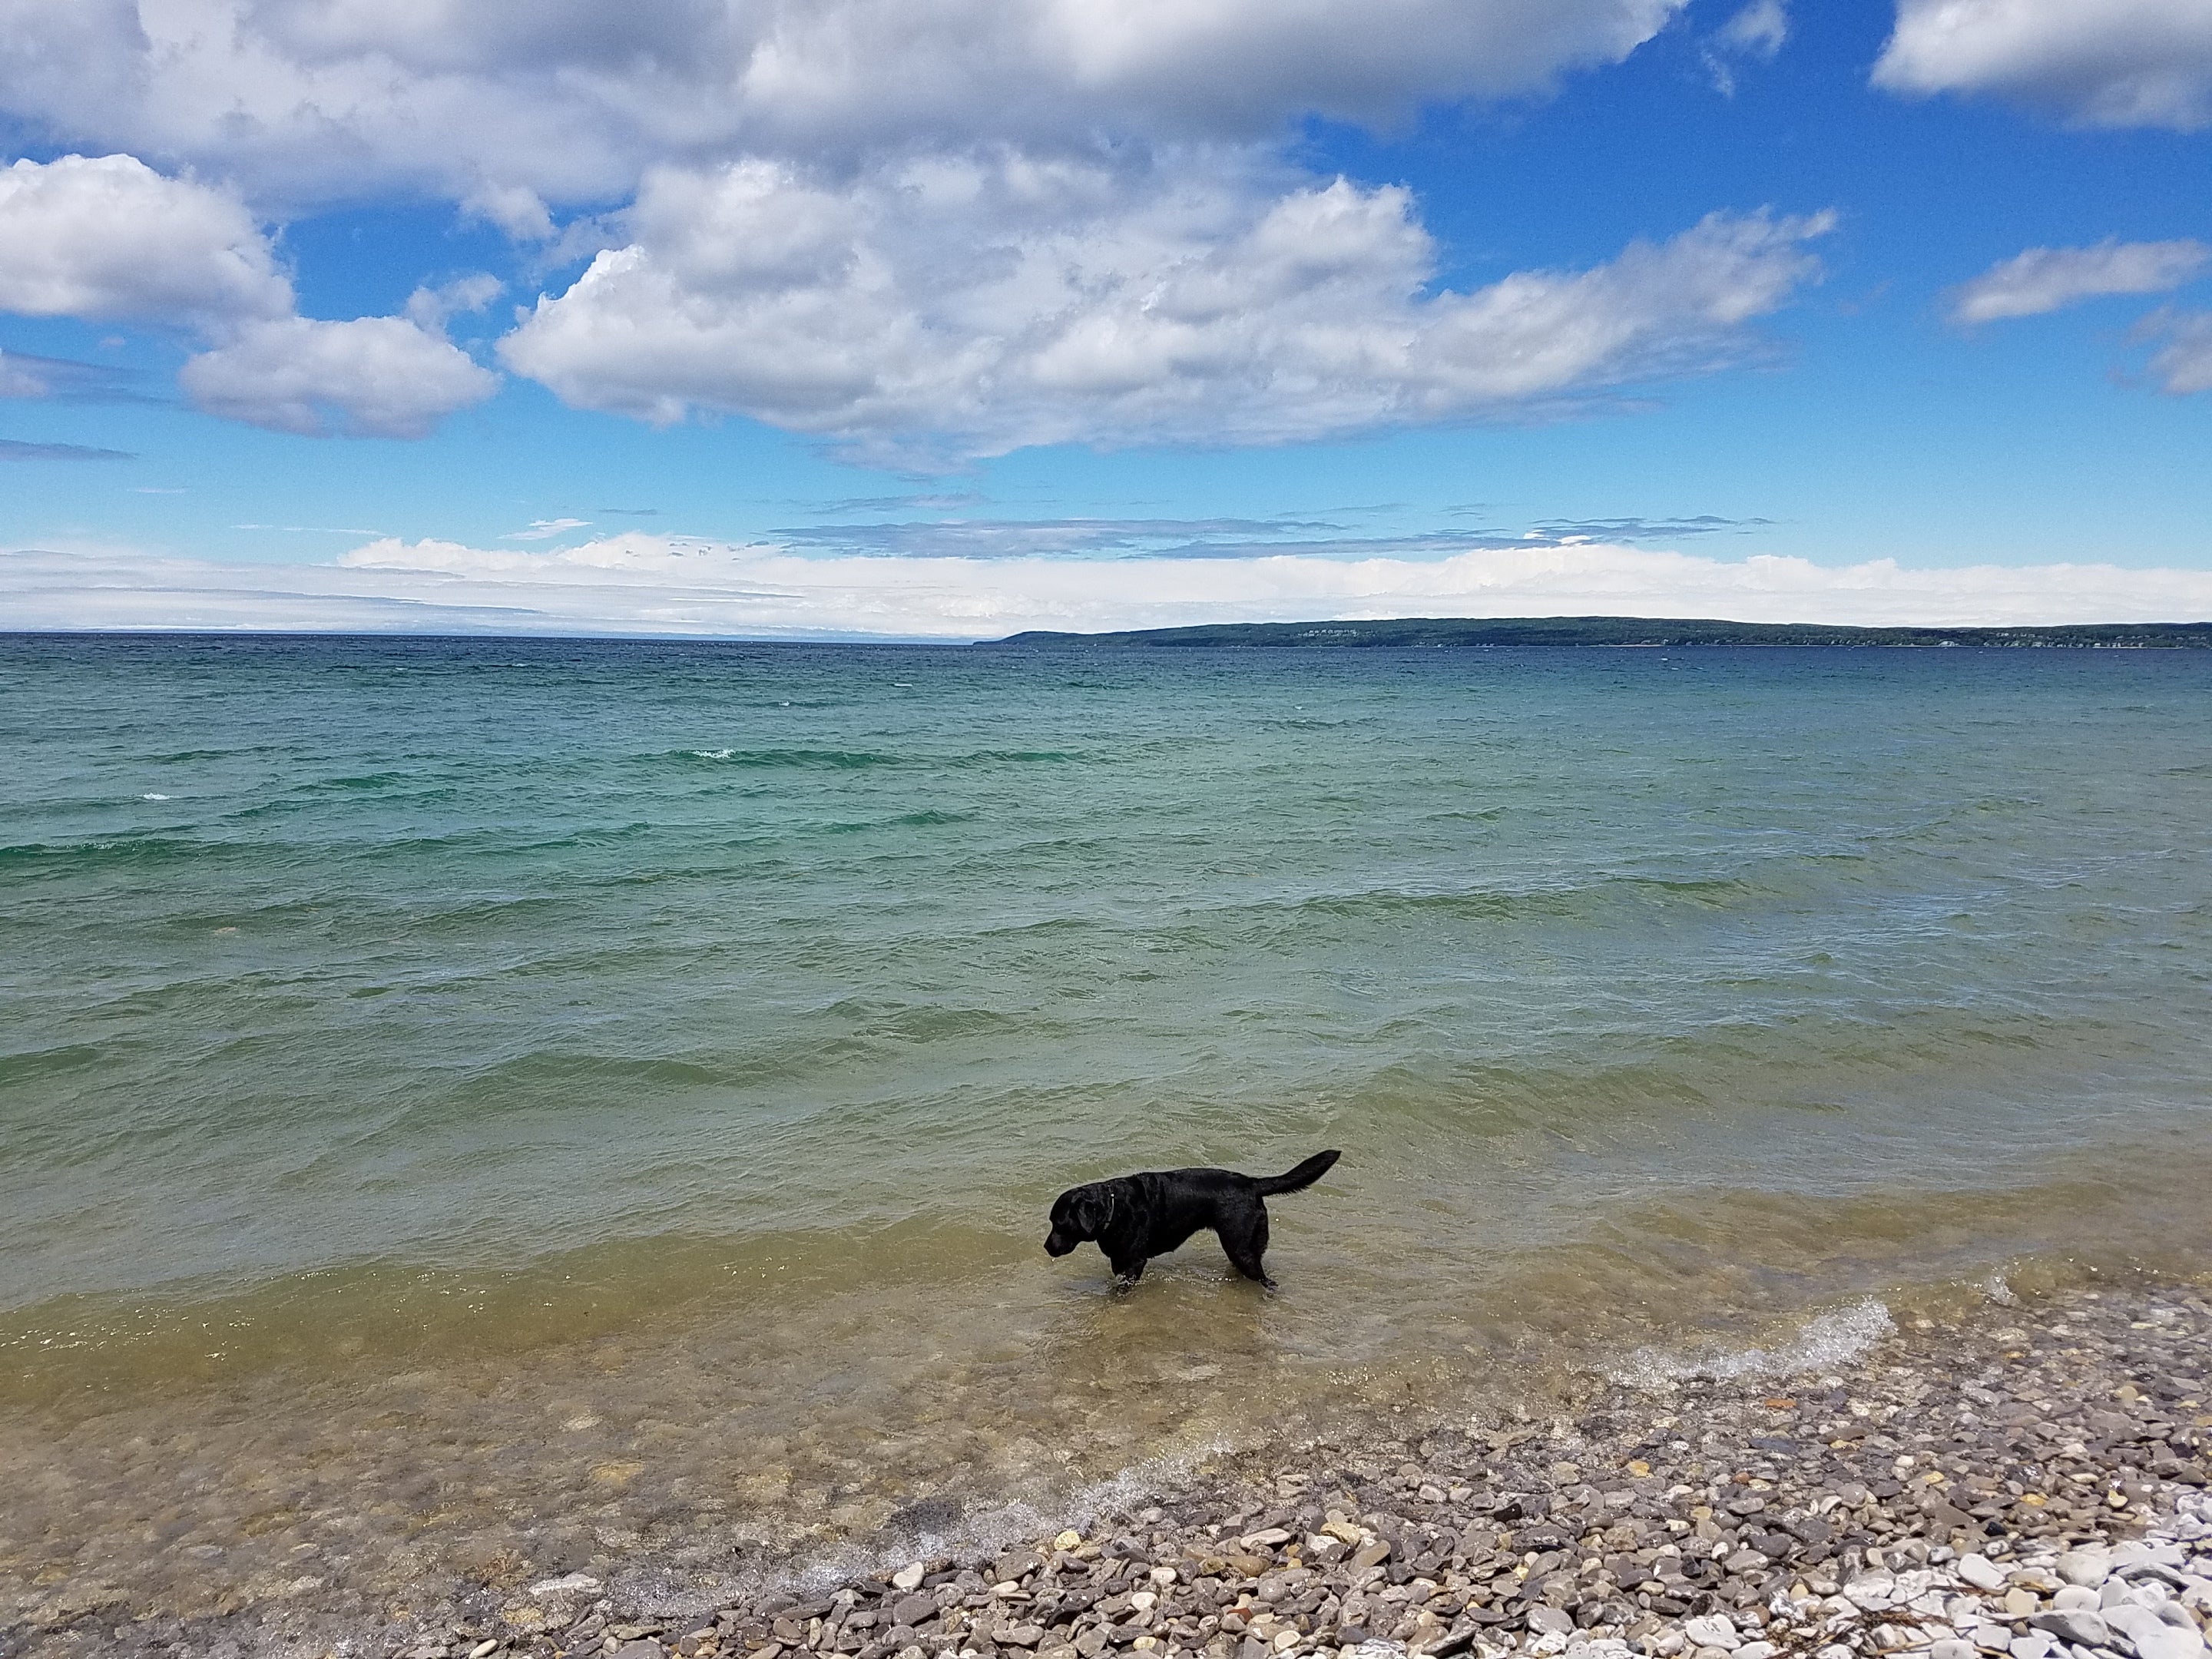 Great access to Lake Michigan where the beach is rocky but perfect for a eager lab to swim in.